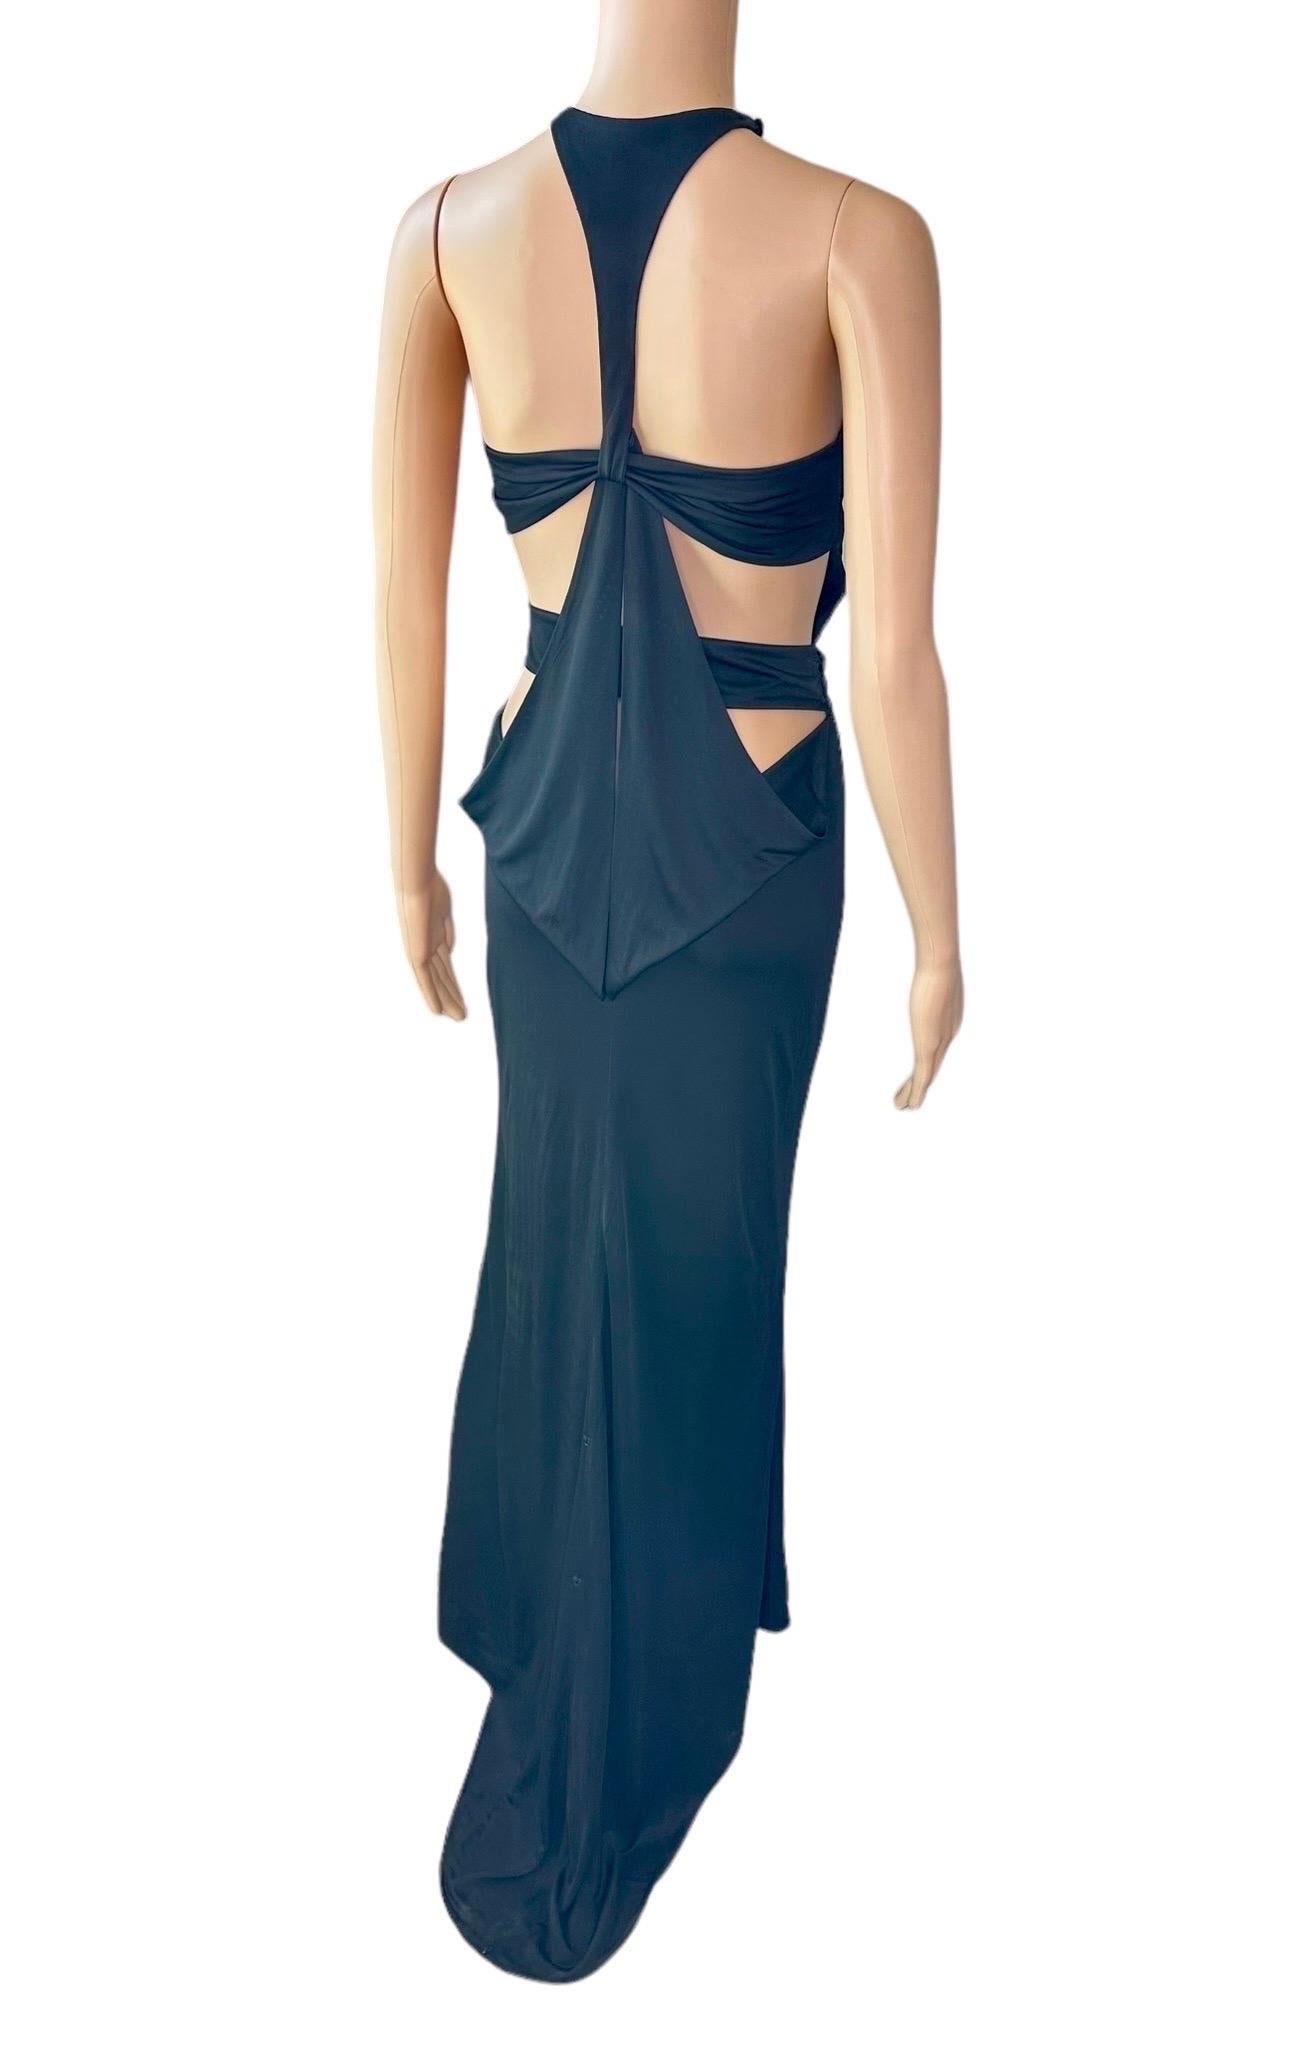 Tom Ford for Gucci F/W 2004 Embellished Plunging Cutout Black Evening Dress Gown For Sale 8